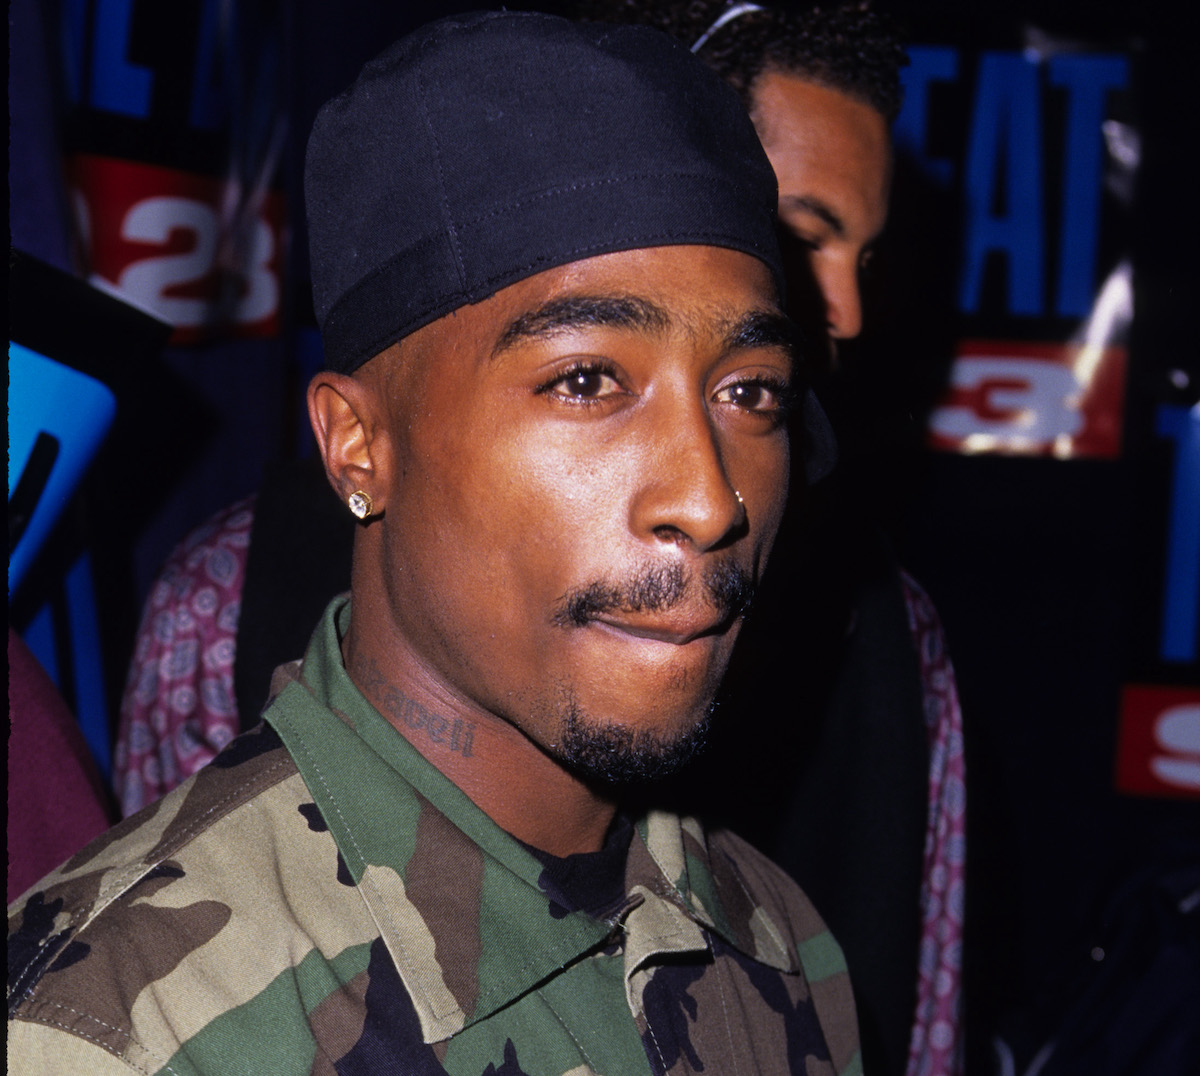 A New Exhibit to Highlight the Life and Career of Tupac Shakur